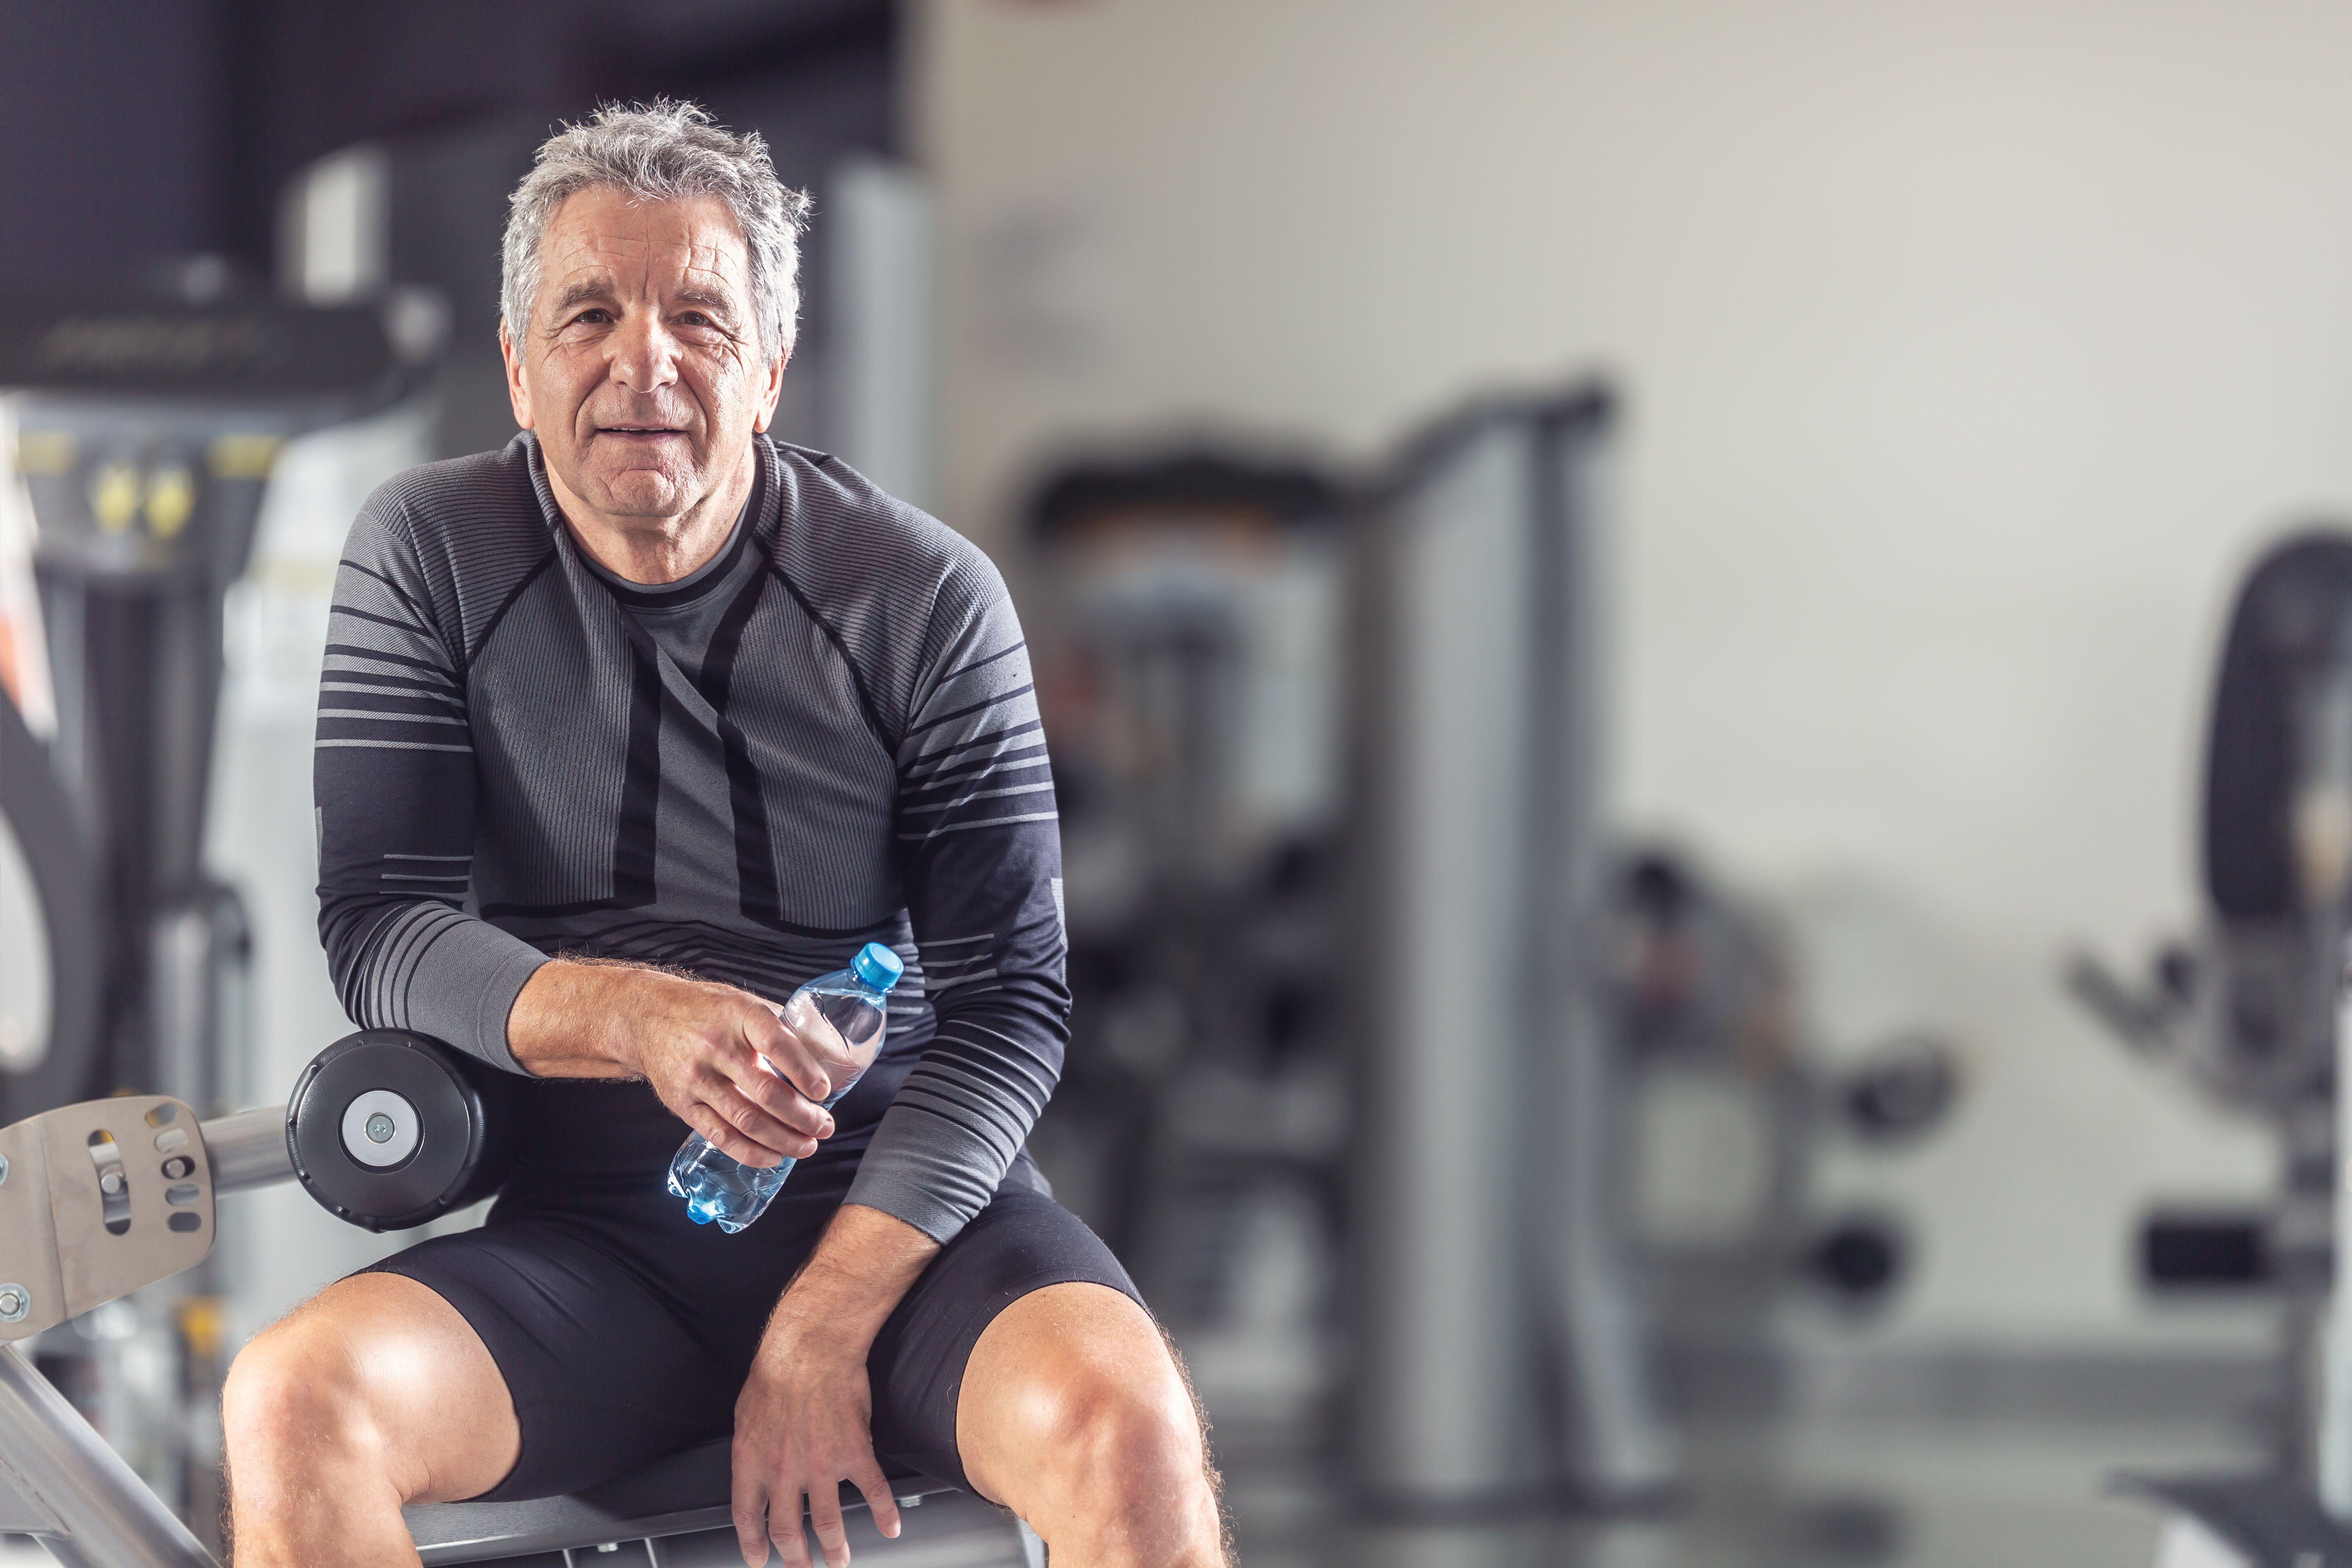 Pensioner keeps himself fit working out in a gym, resting with a bottle of water.